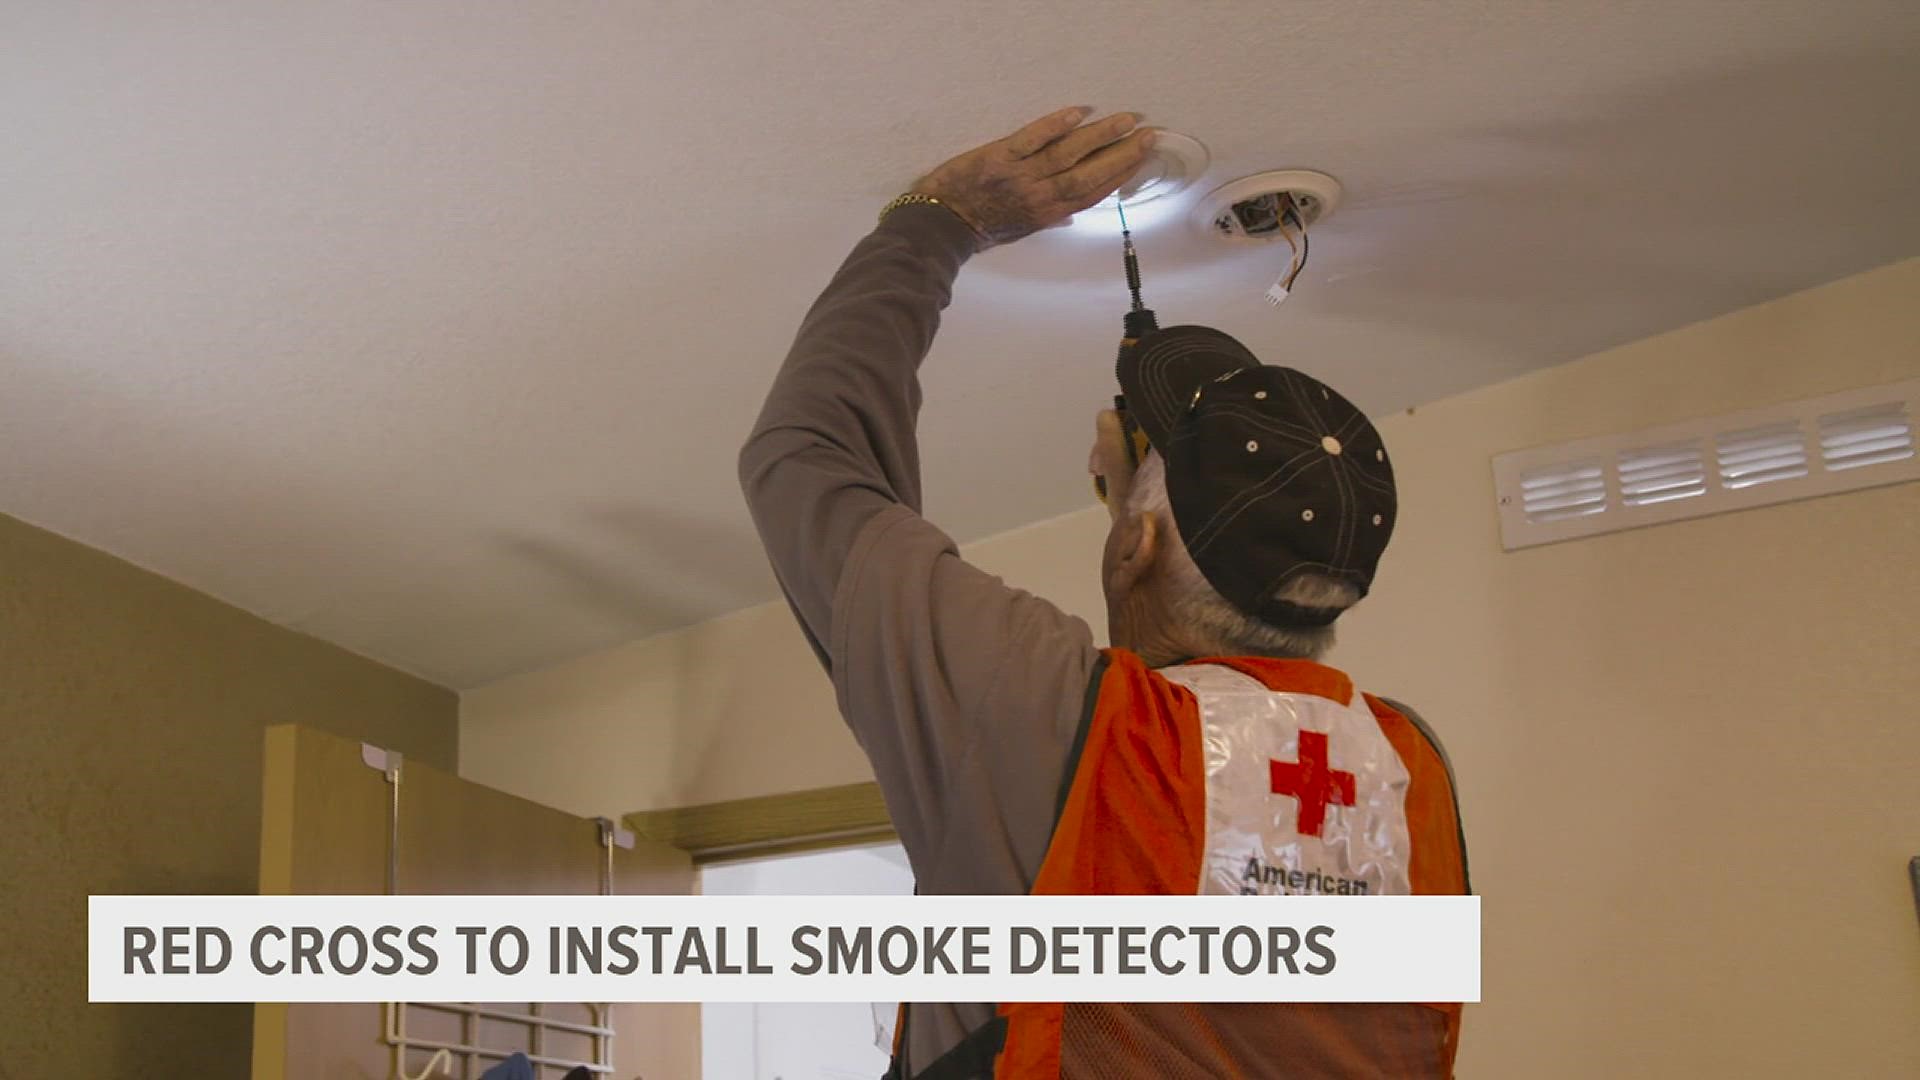 More than 400 families told the American Red Cross of the Quad Cities that they need working smoke detectors in their homes.